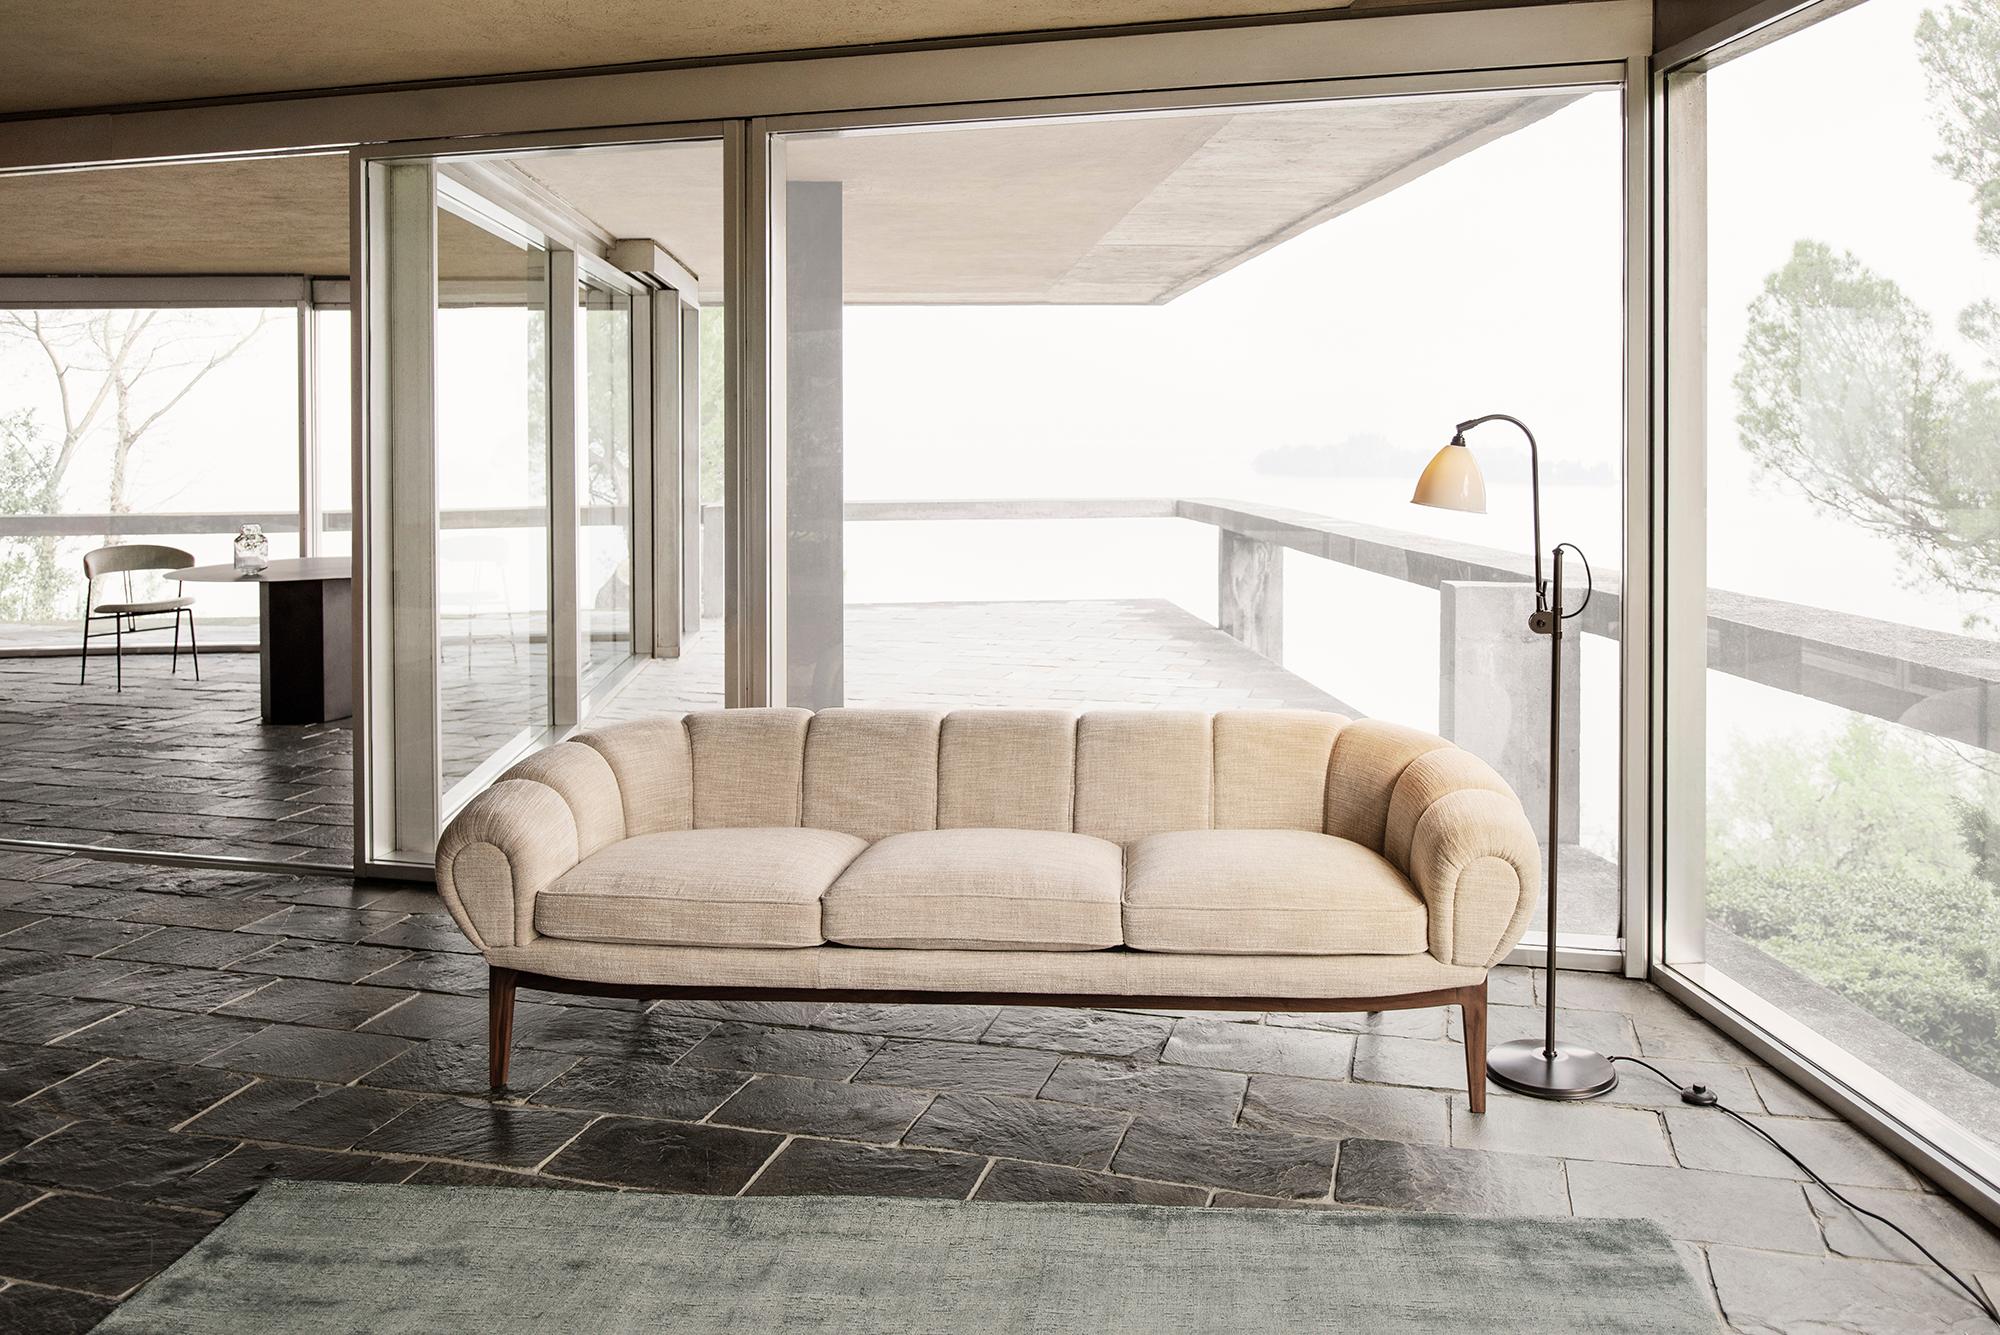 Steel Fabric 'Croissant' Sofa by Illum Wikkelsø for GUBI with Walnut Legs For Sale